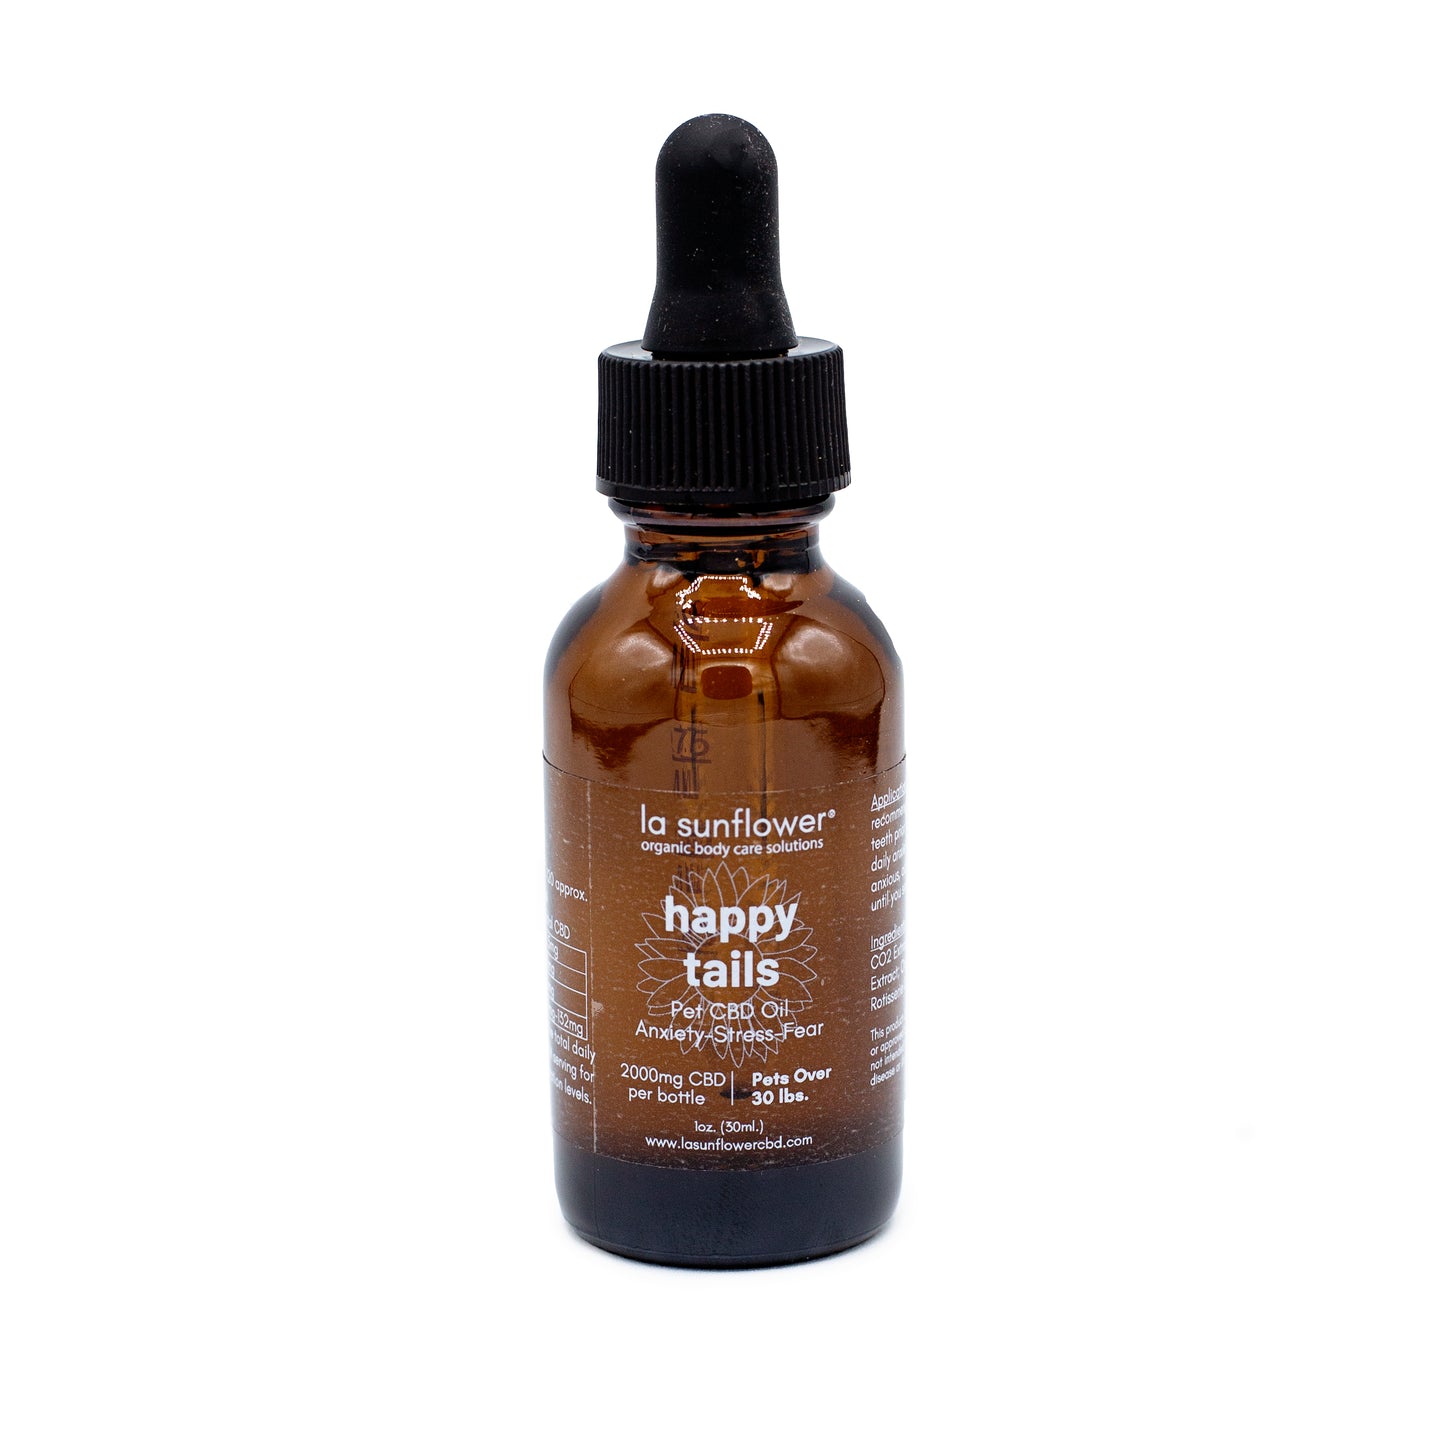 Happy Tails Pet CBD Oil: 2000mg/CBD Formulated for Pets Over 30 LBS.